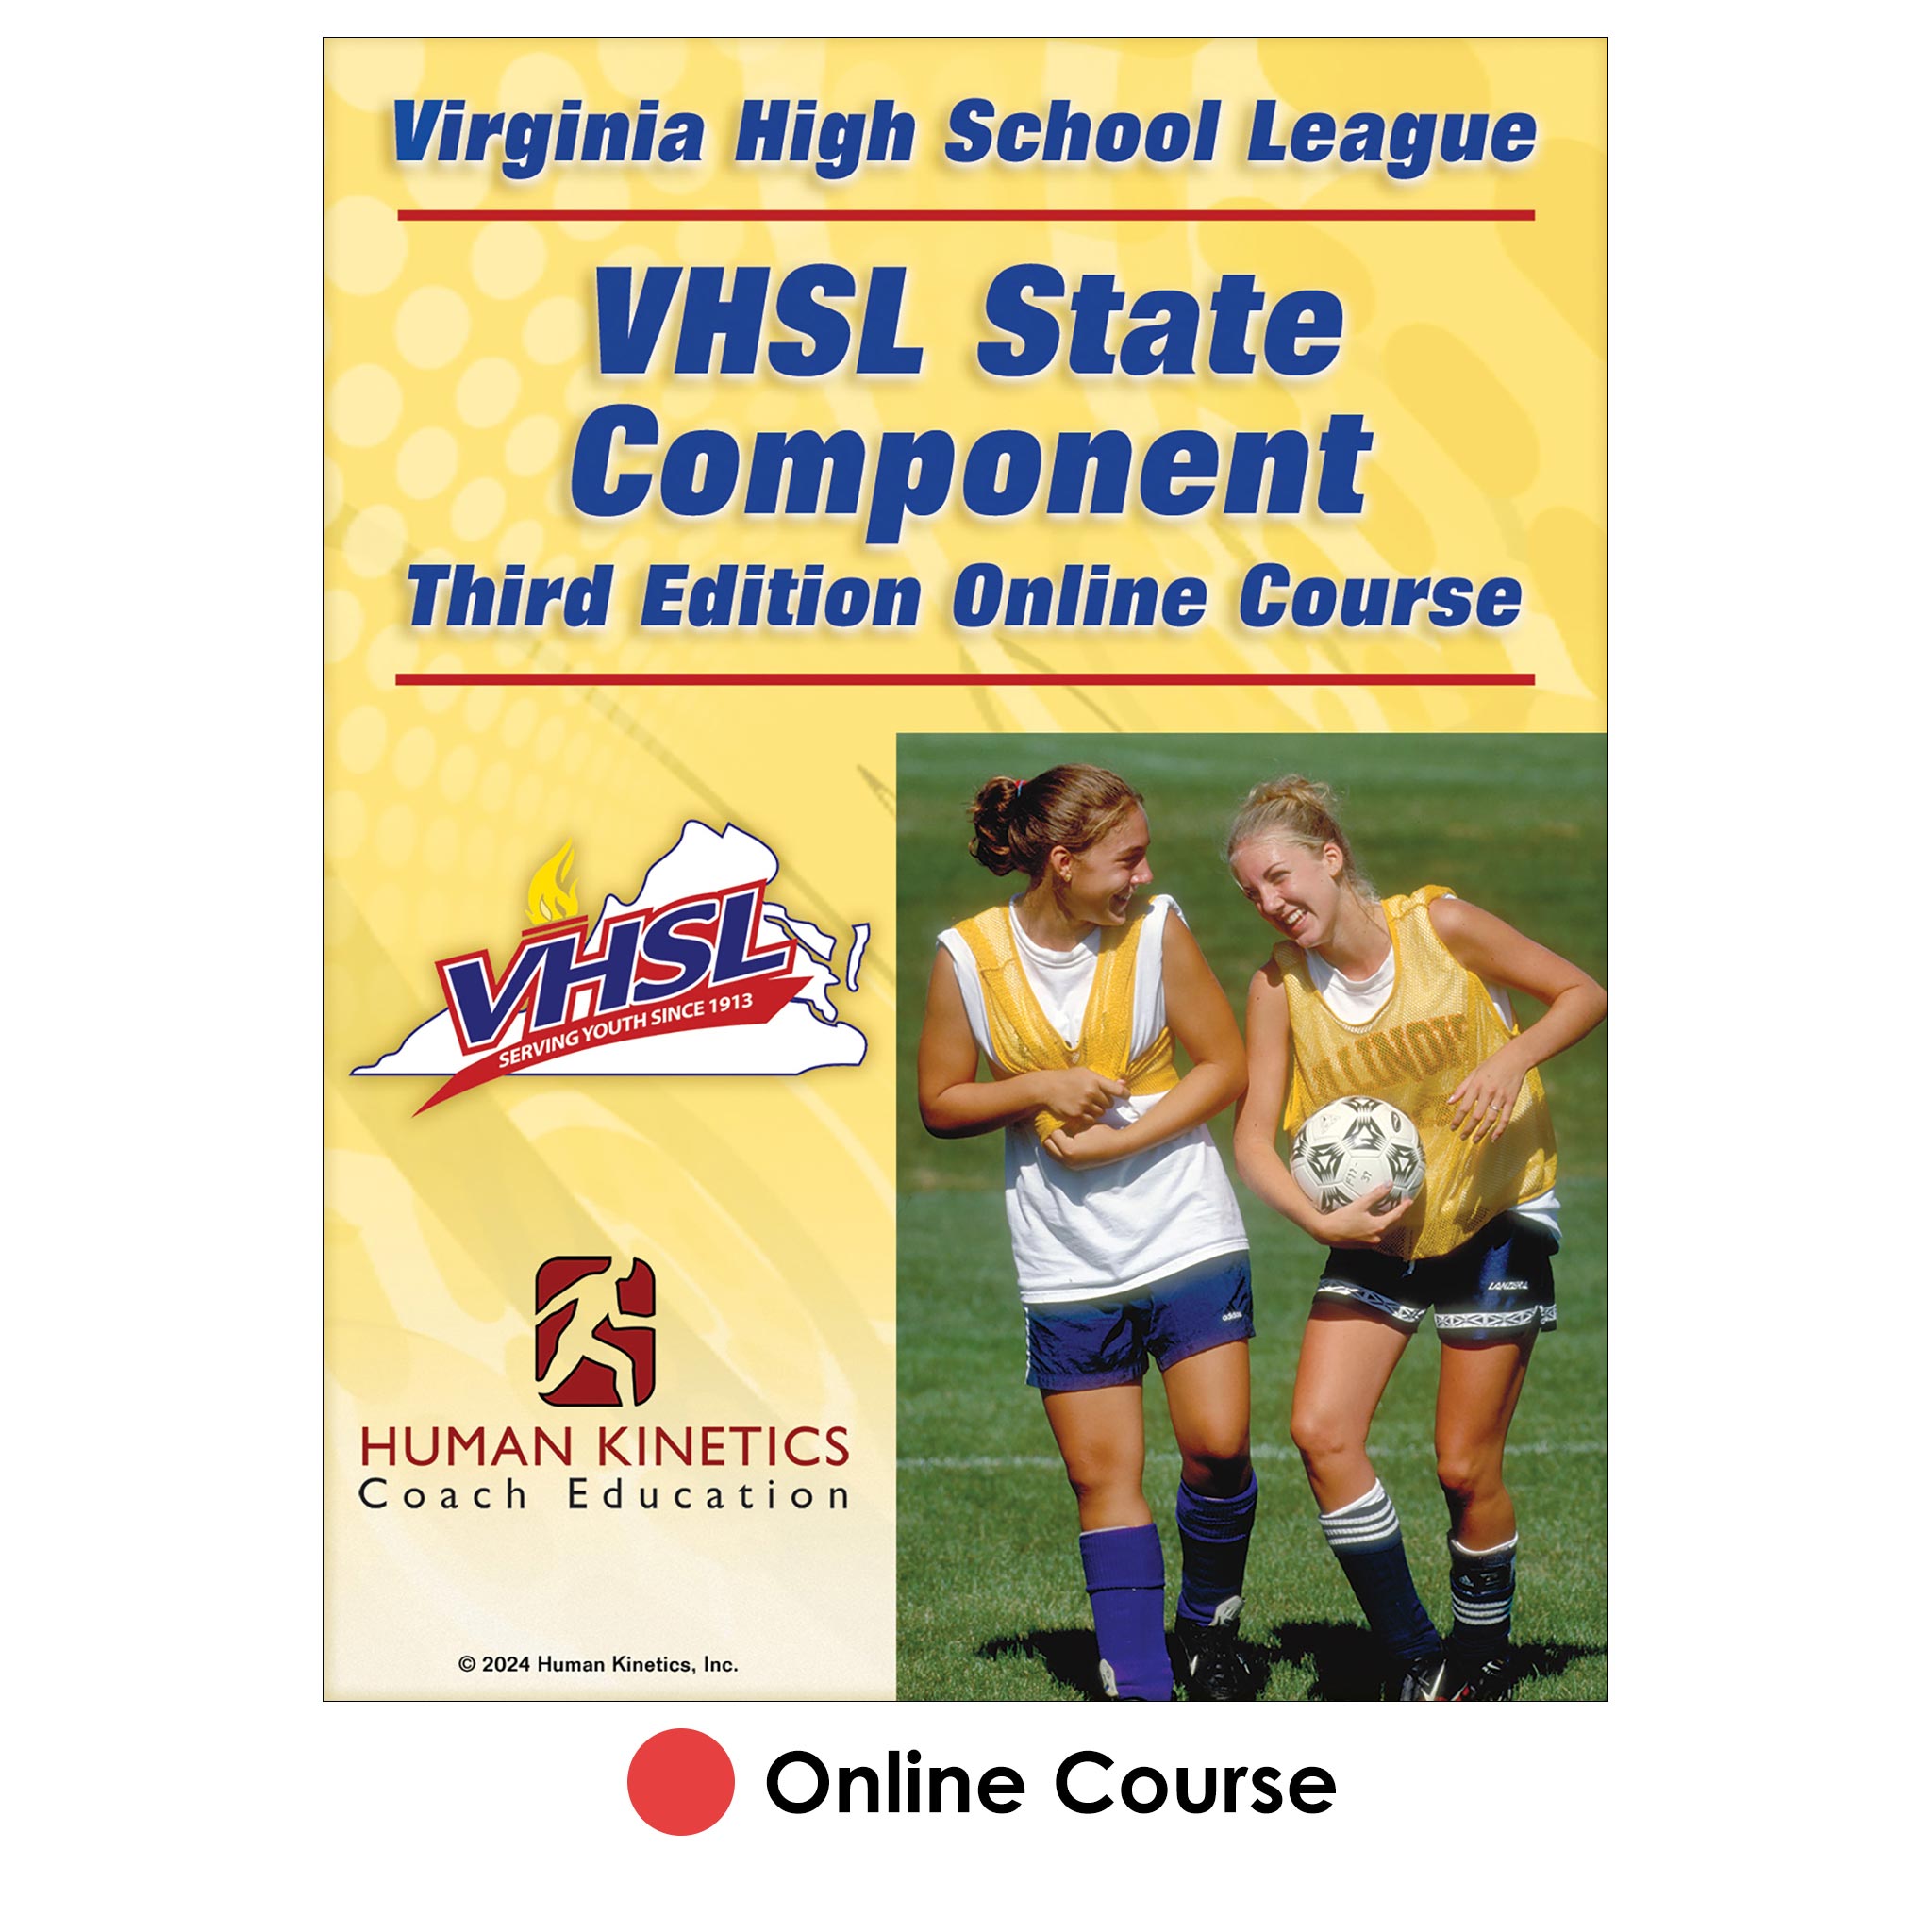 VHSL State Component 3rd Edition Online Course